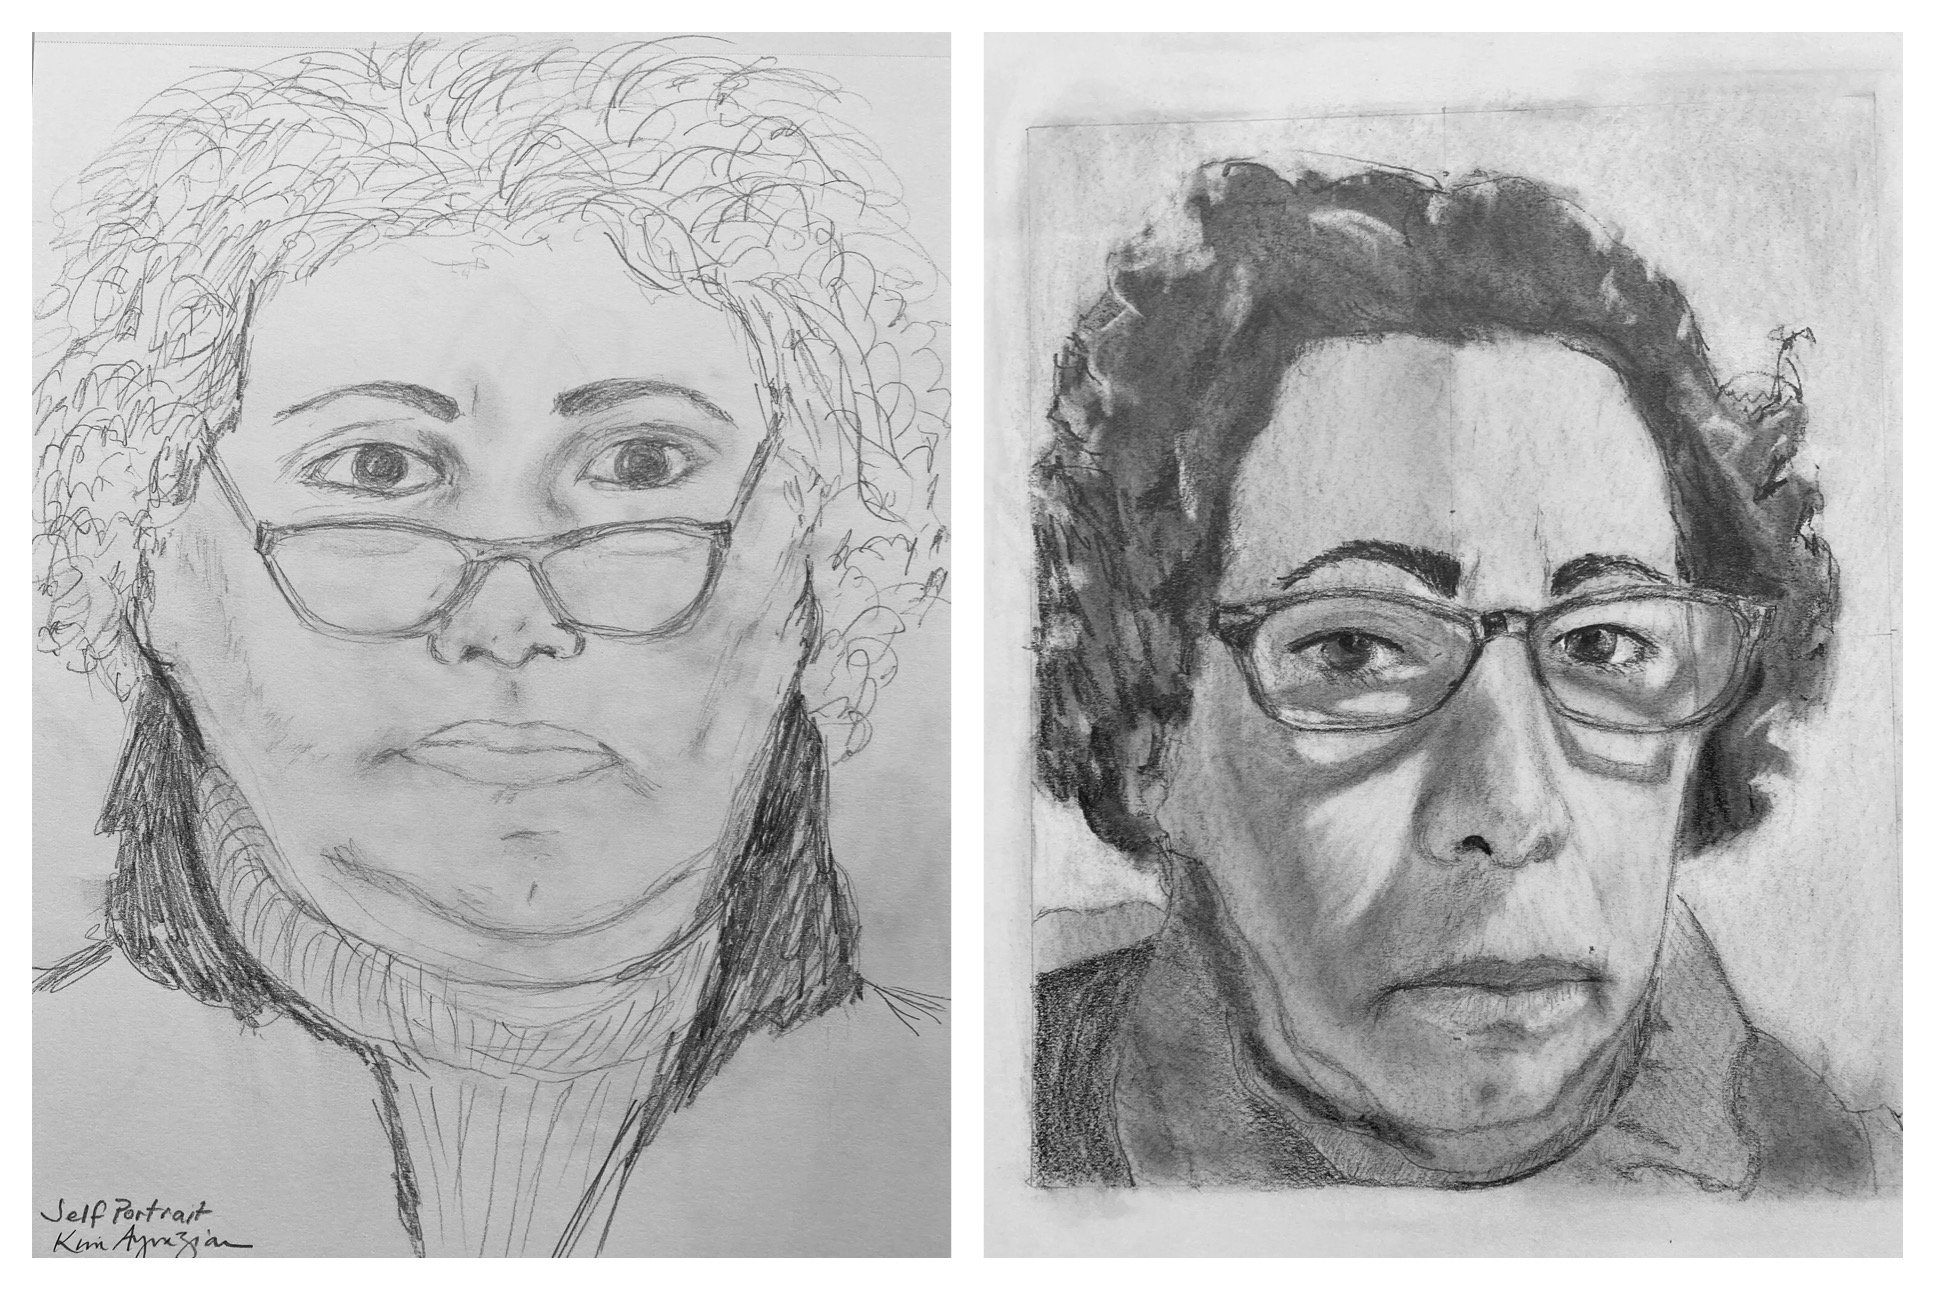 Kim's Before and After Self-Portraits March 7-12, 2022